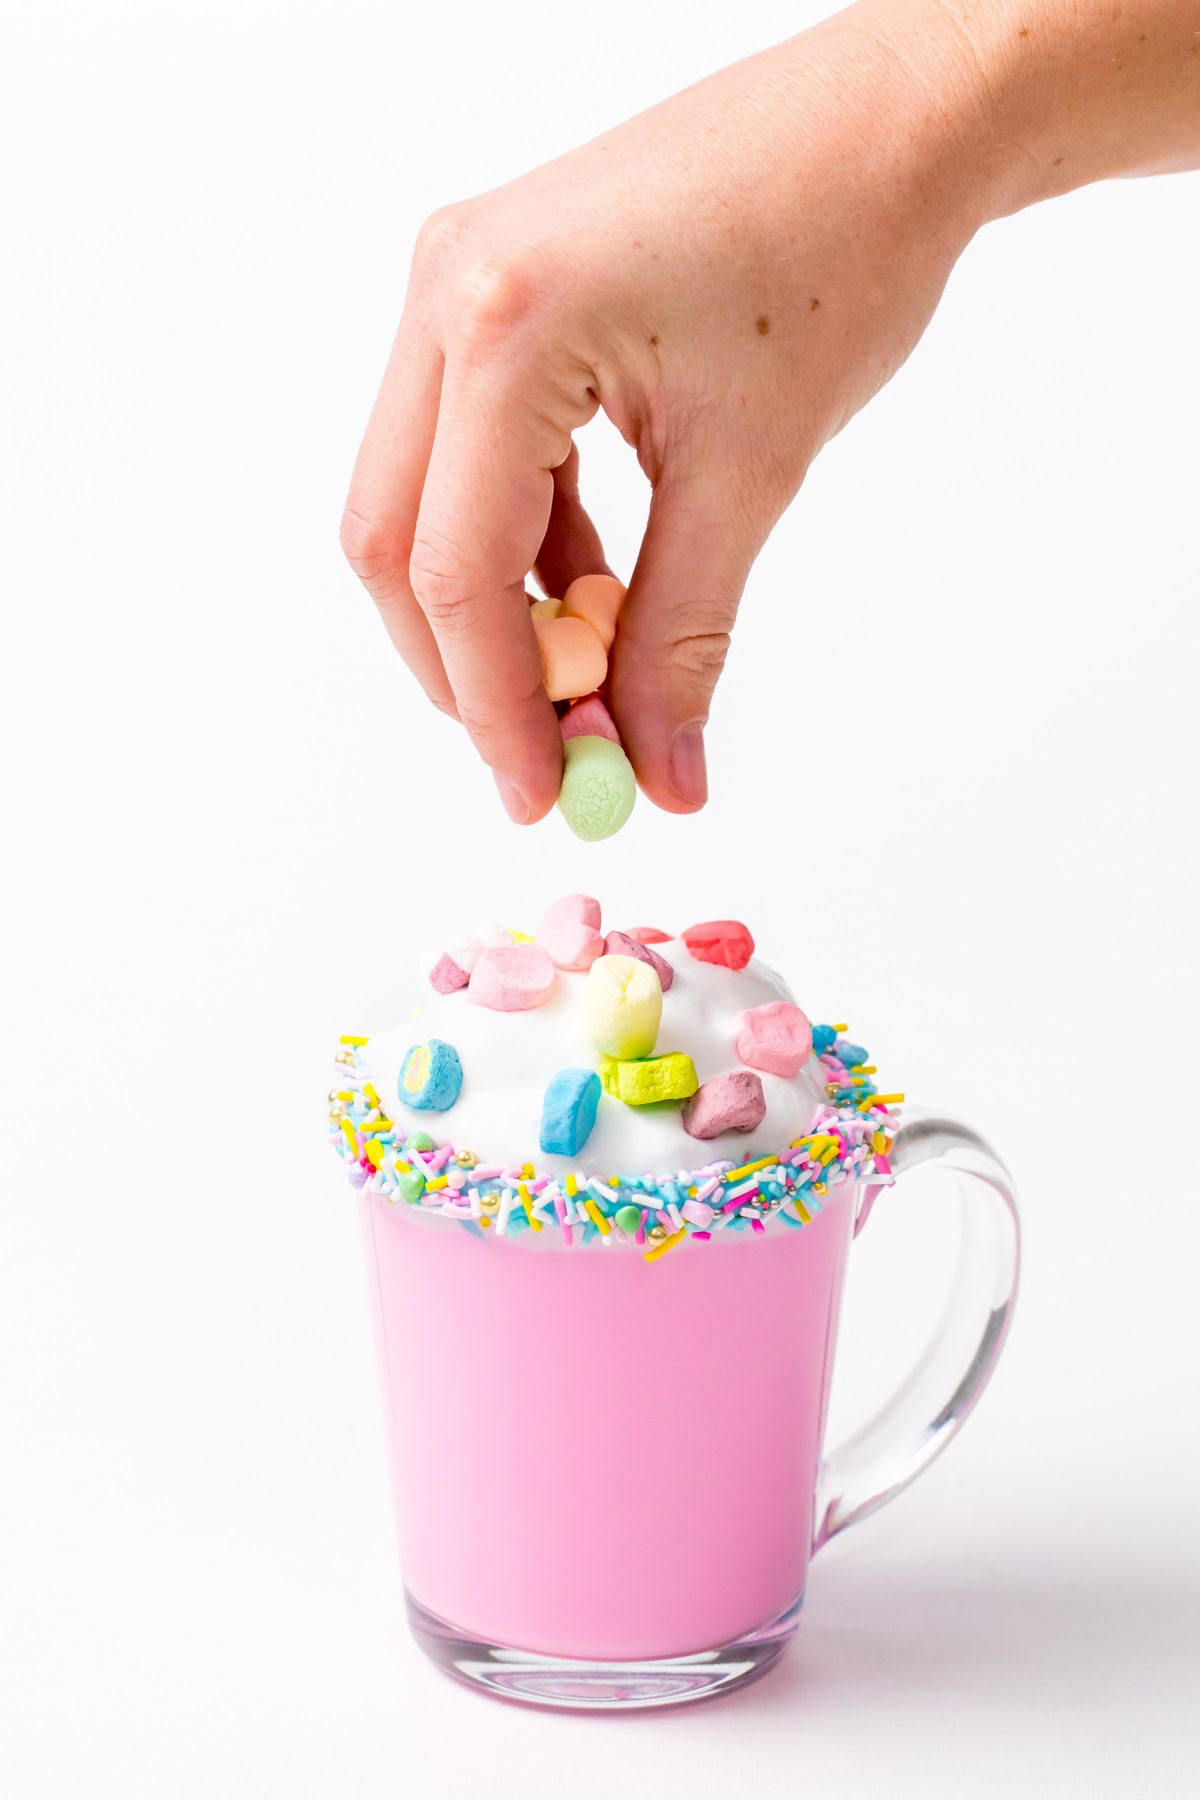 5D4B3079 - Unicorn Hot Chocolate - adding lucky charms marshmellows over the whipping cream